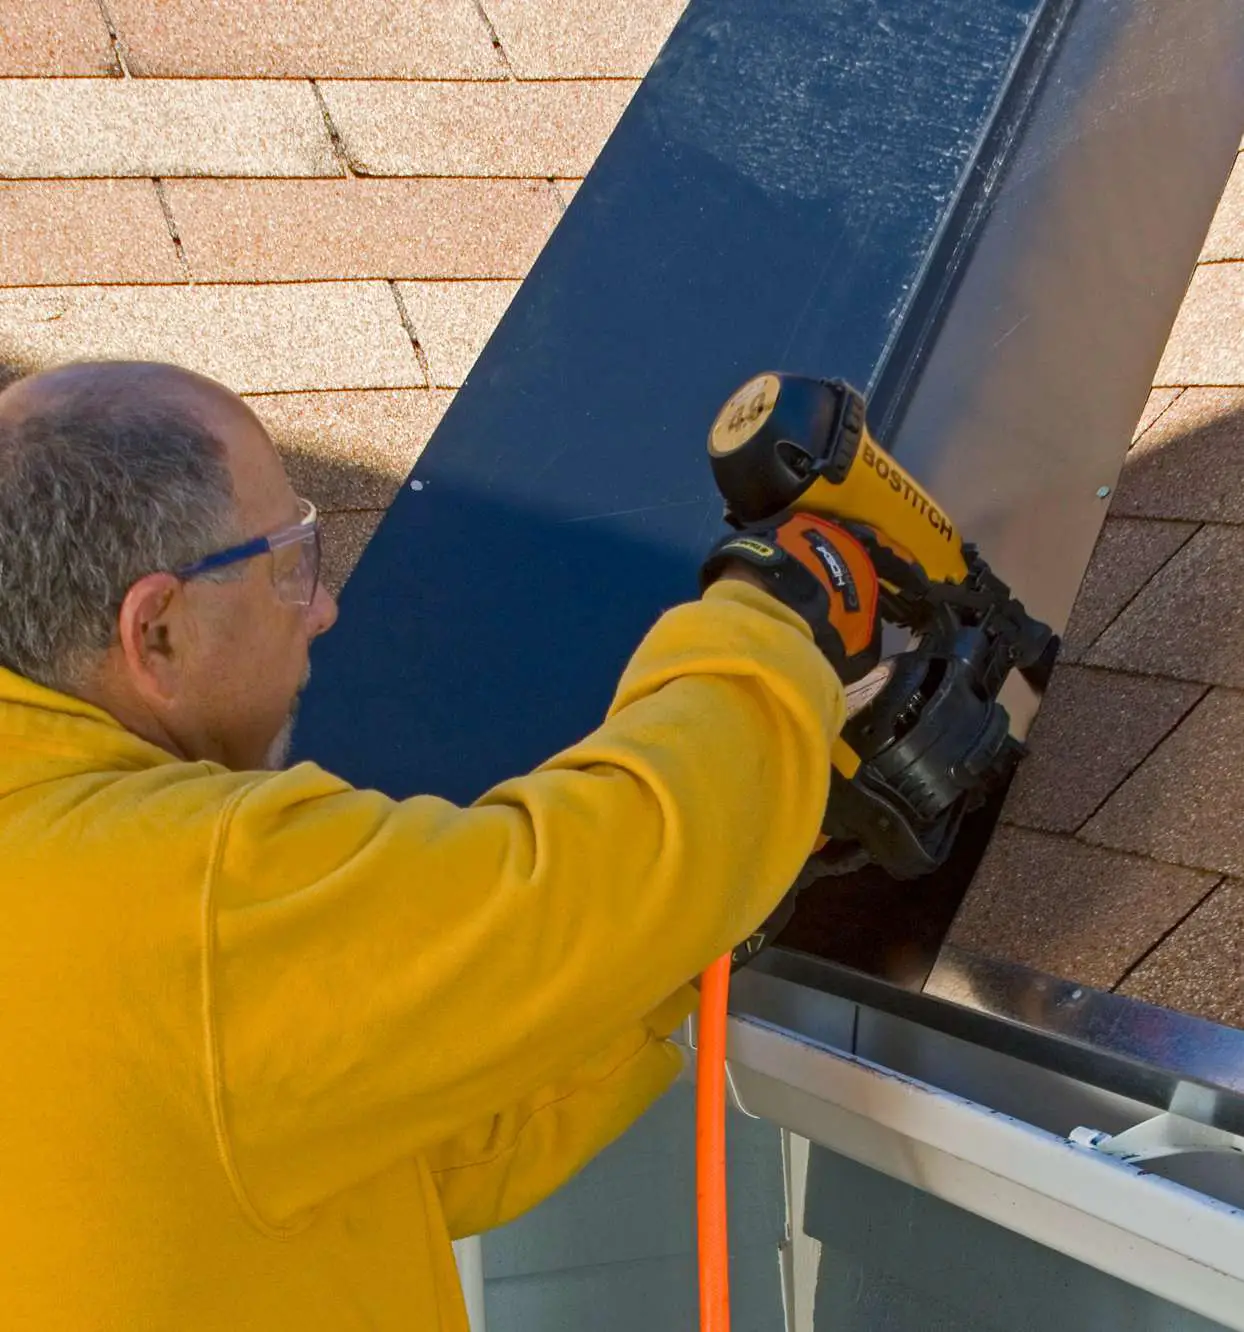 Expert Tips for Roofing Over Existing Shingles